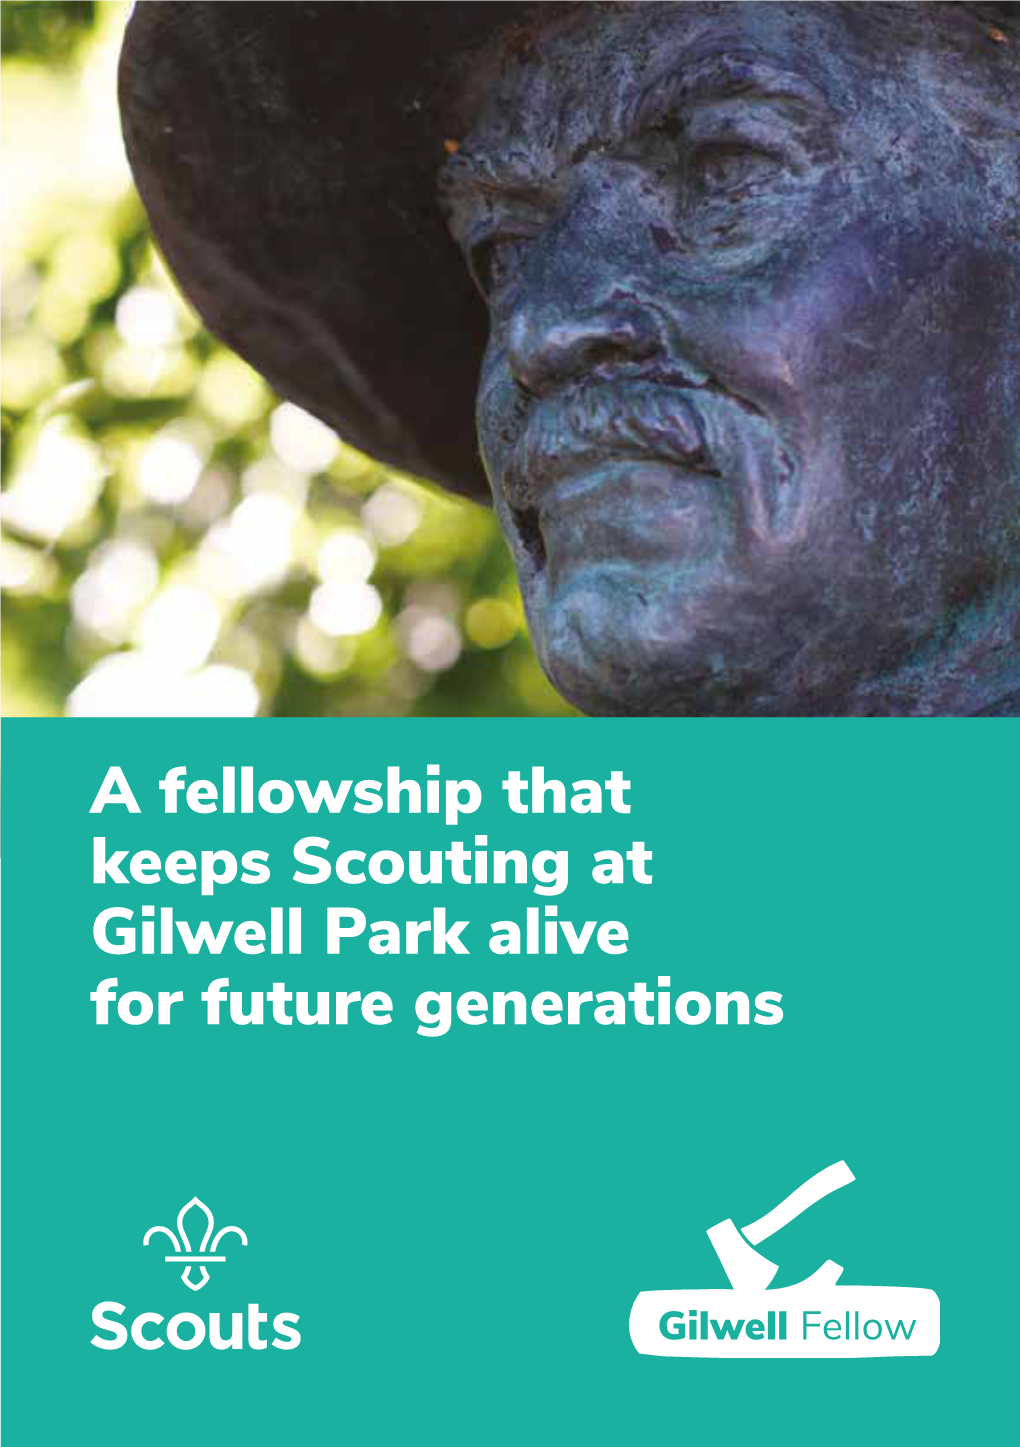 A Fellowship That Keeps Scouting at Gilwell Park Alive for Future Generations Welcome to the Fellowship